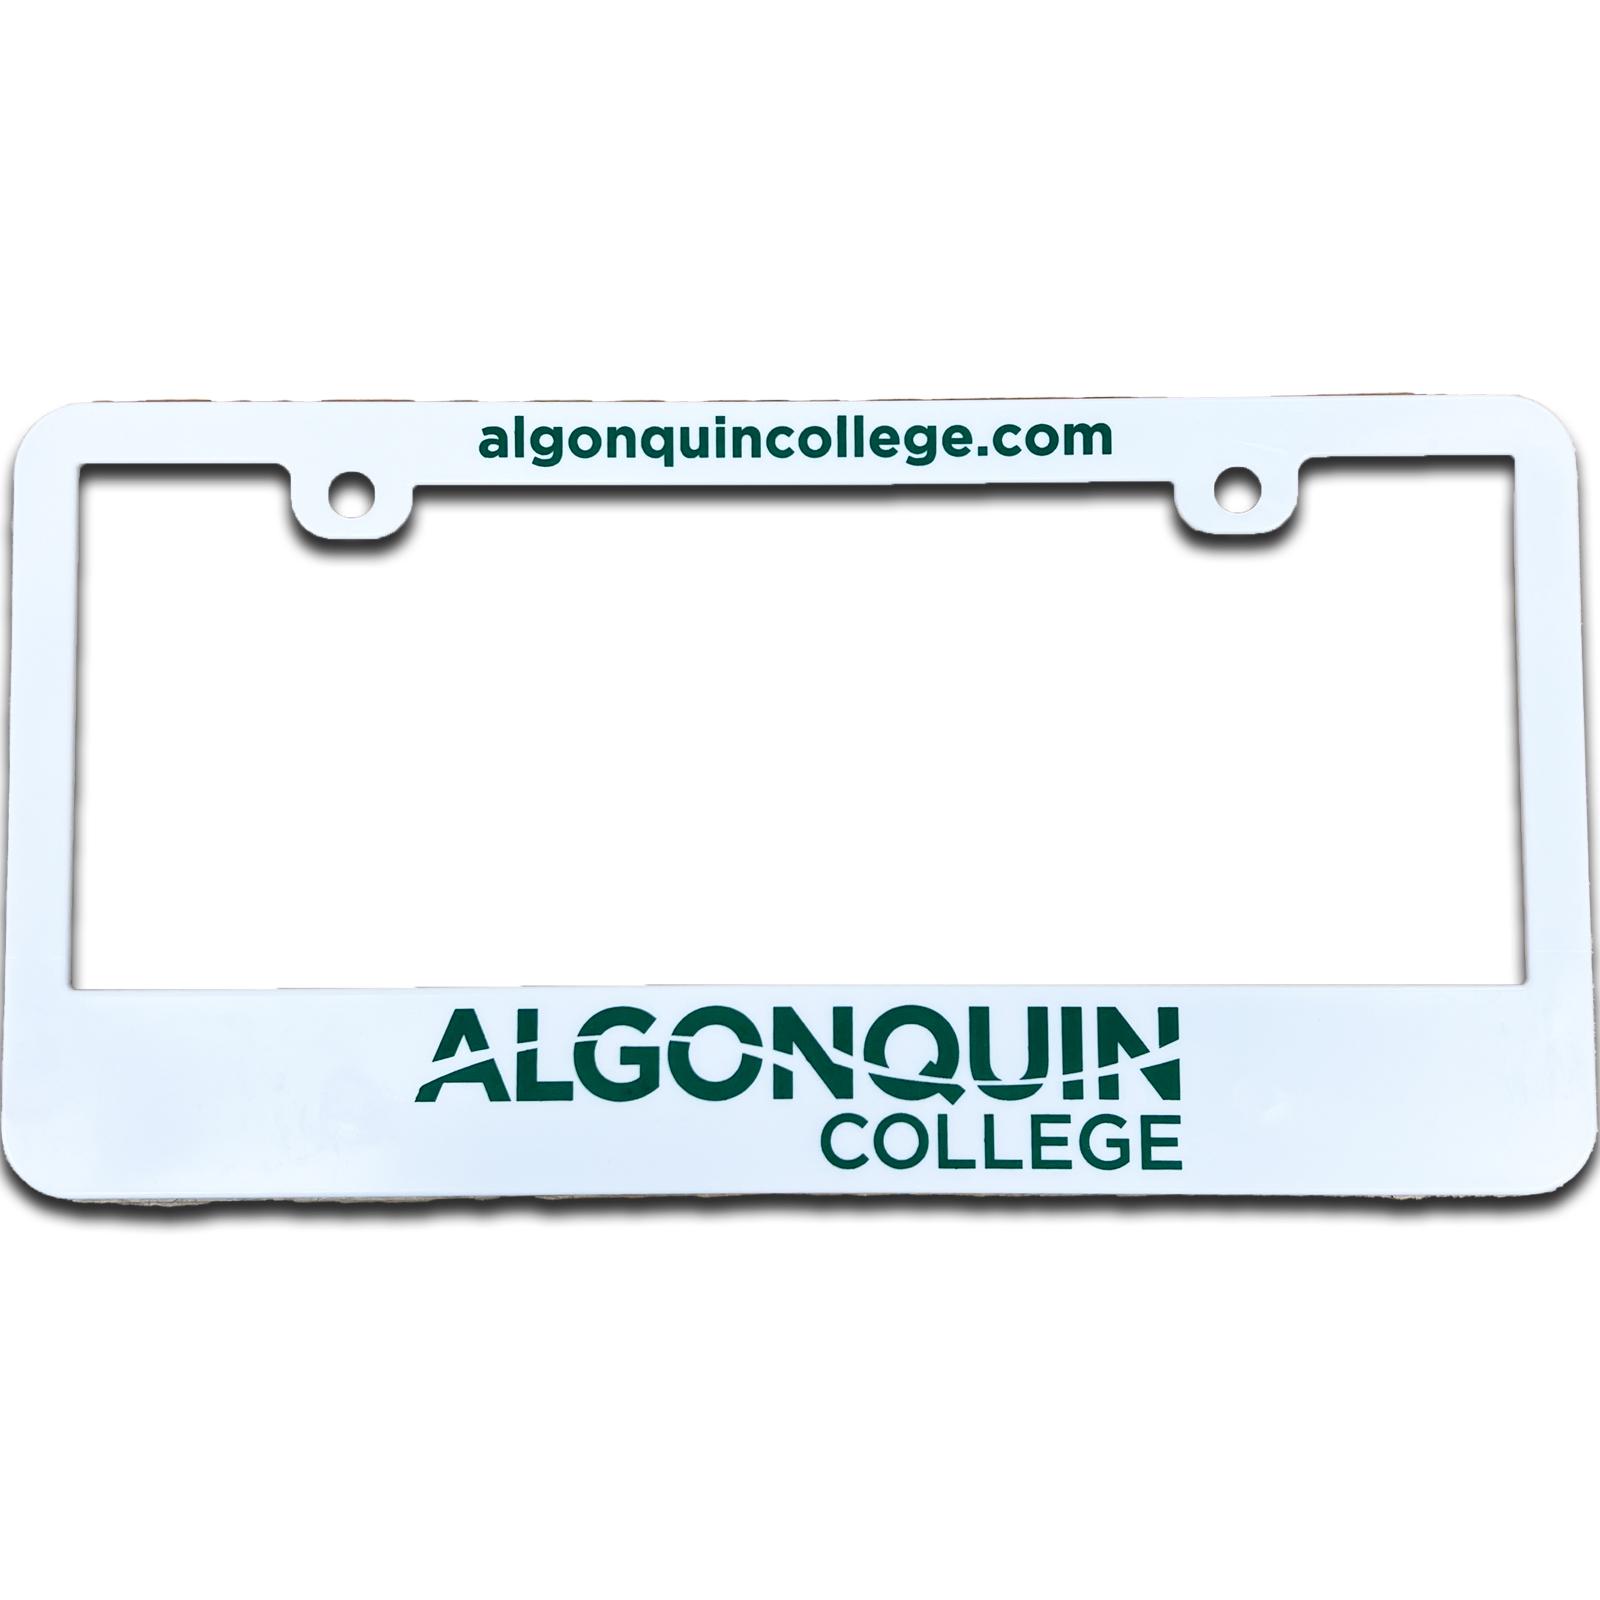 LICENCE PLATE FRAME- WHIT